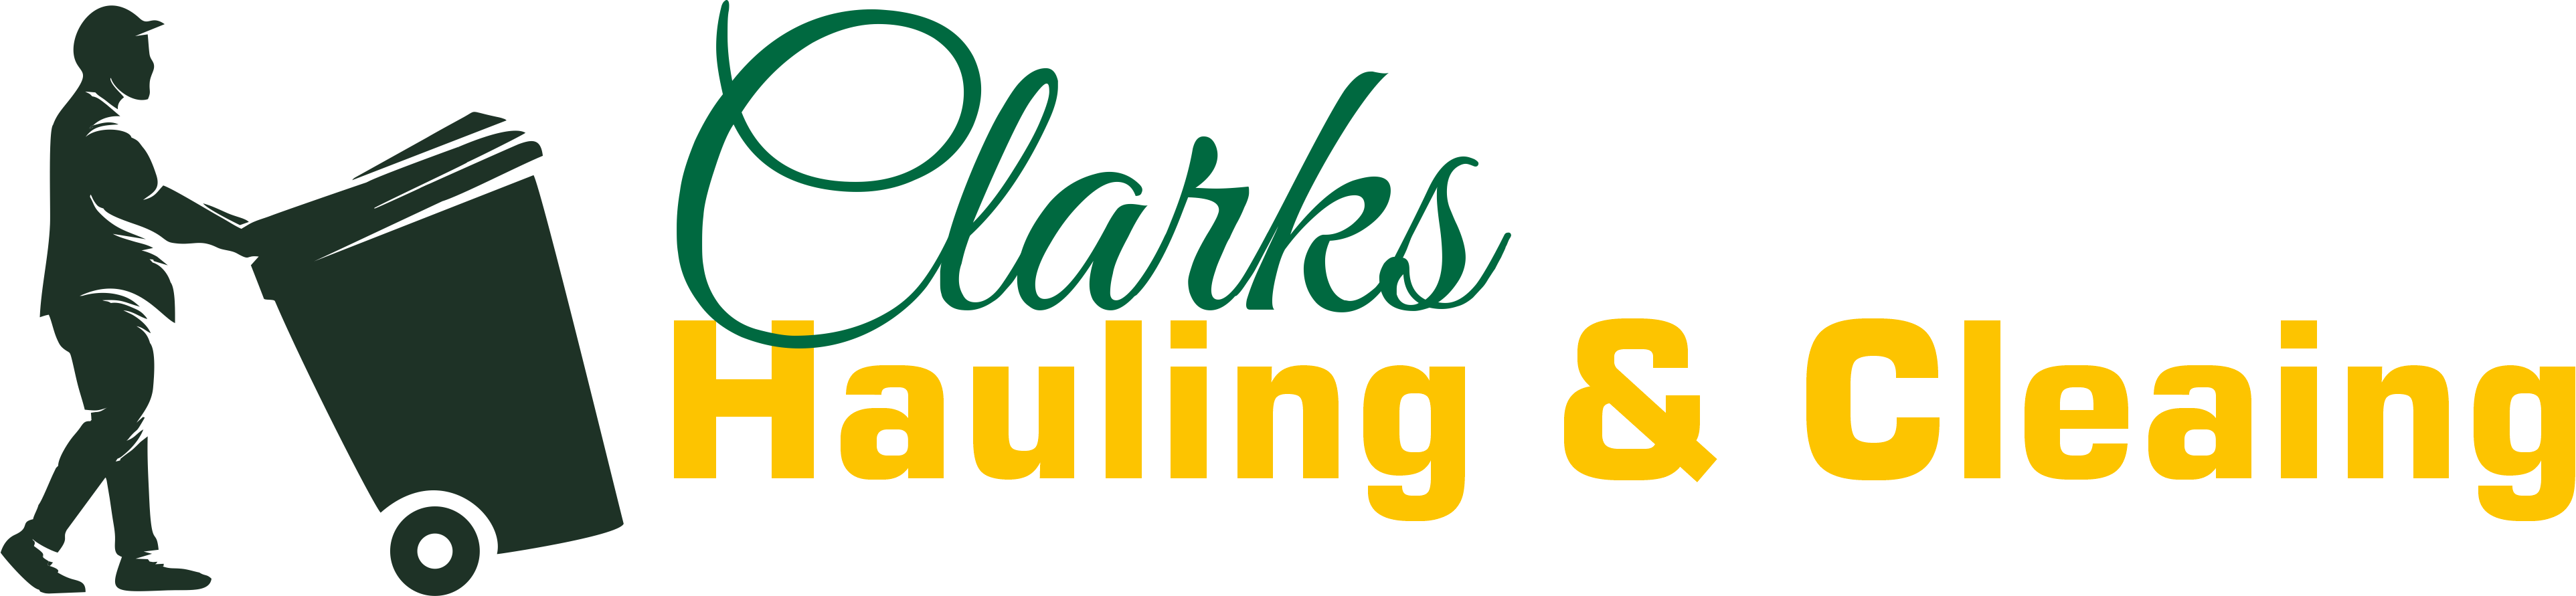 Clarks Hauling & Cleaning